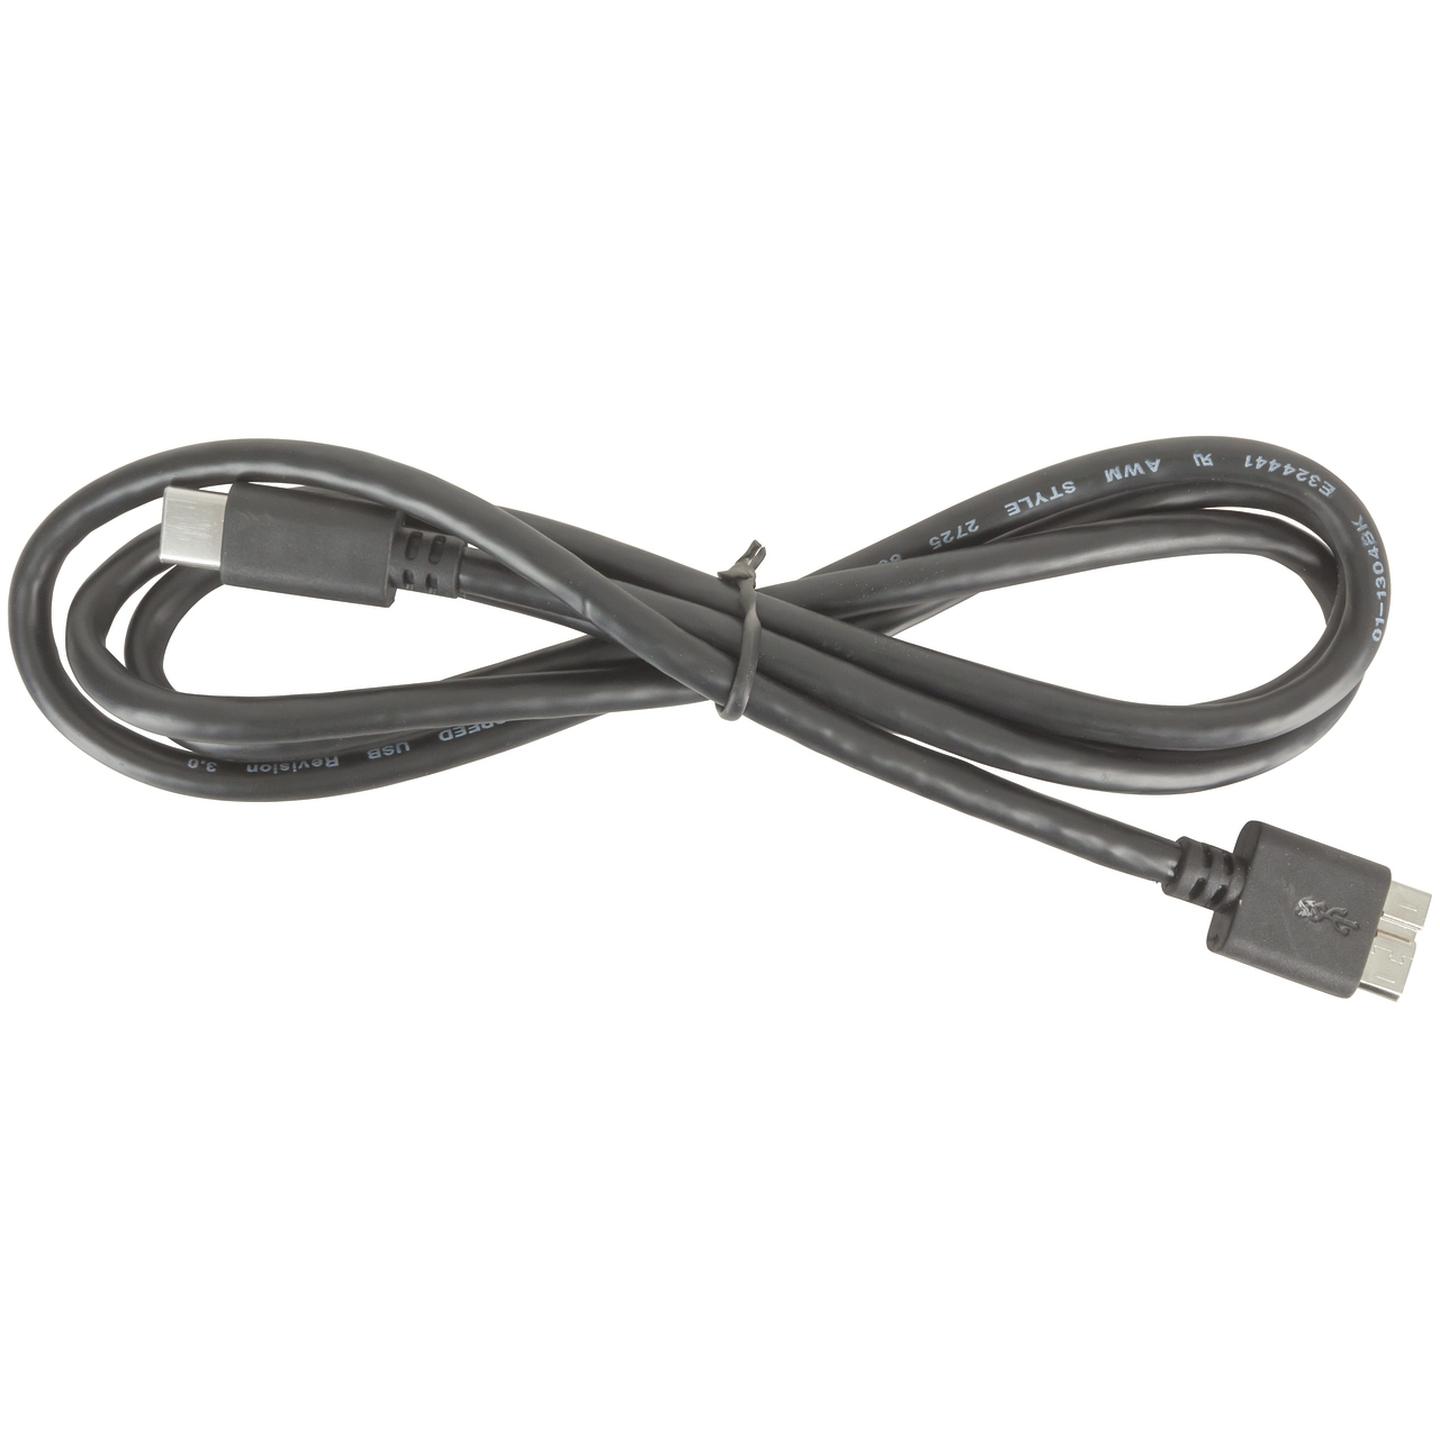 USB Type C to USB 3.0 Micro B Cable 1m